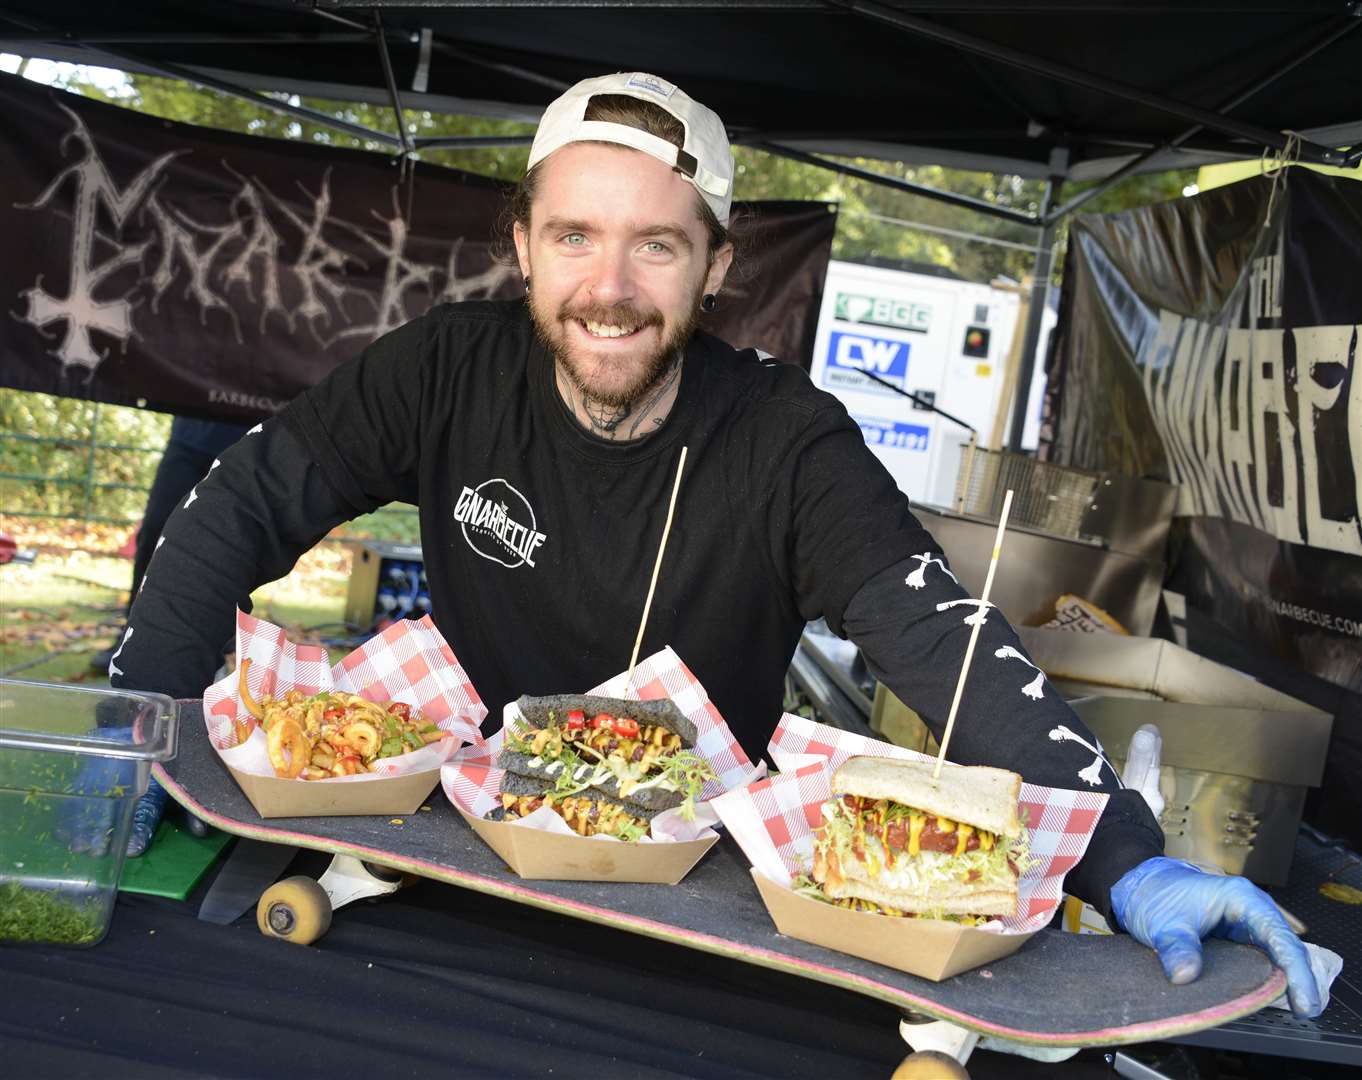 Carl Williams with his vegan meat Alternatives produced by Gnarbecue, at Canterbury Food and Drink Festival 2019. Picture: Paul Amos